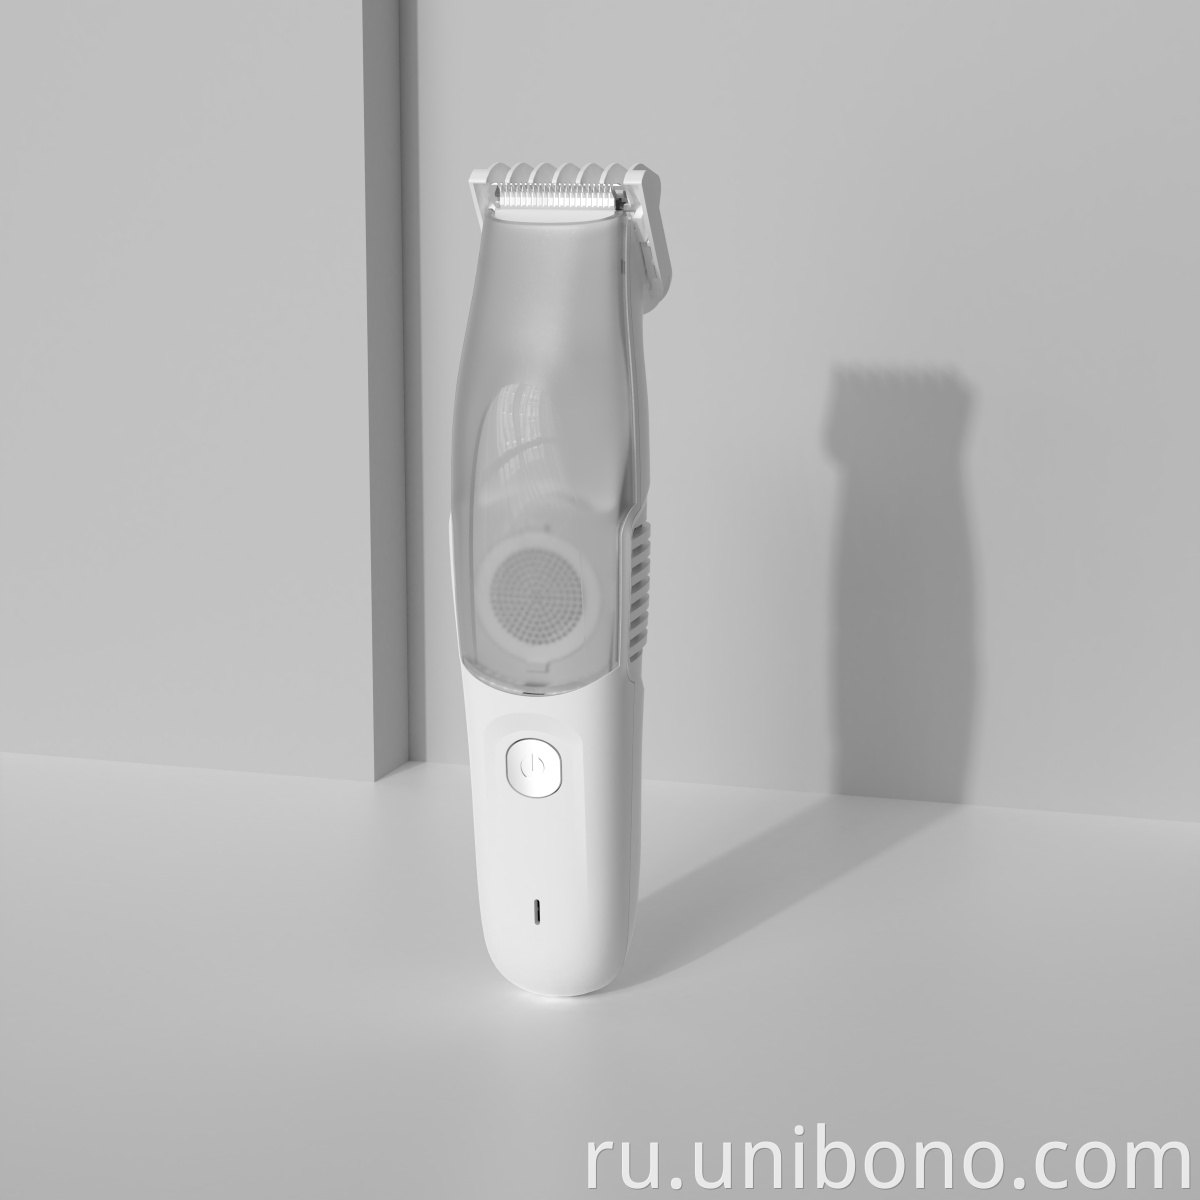 Adjustable Comb Two Speed Suction Hair Clipper